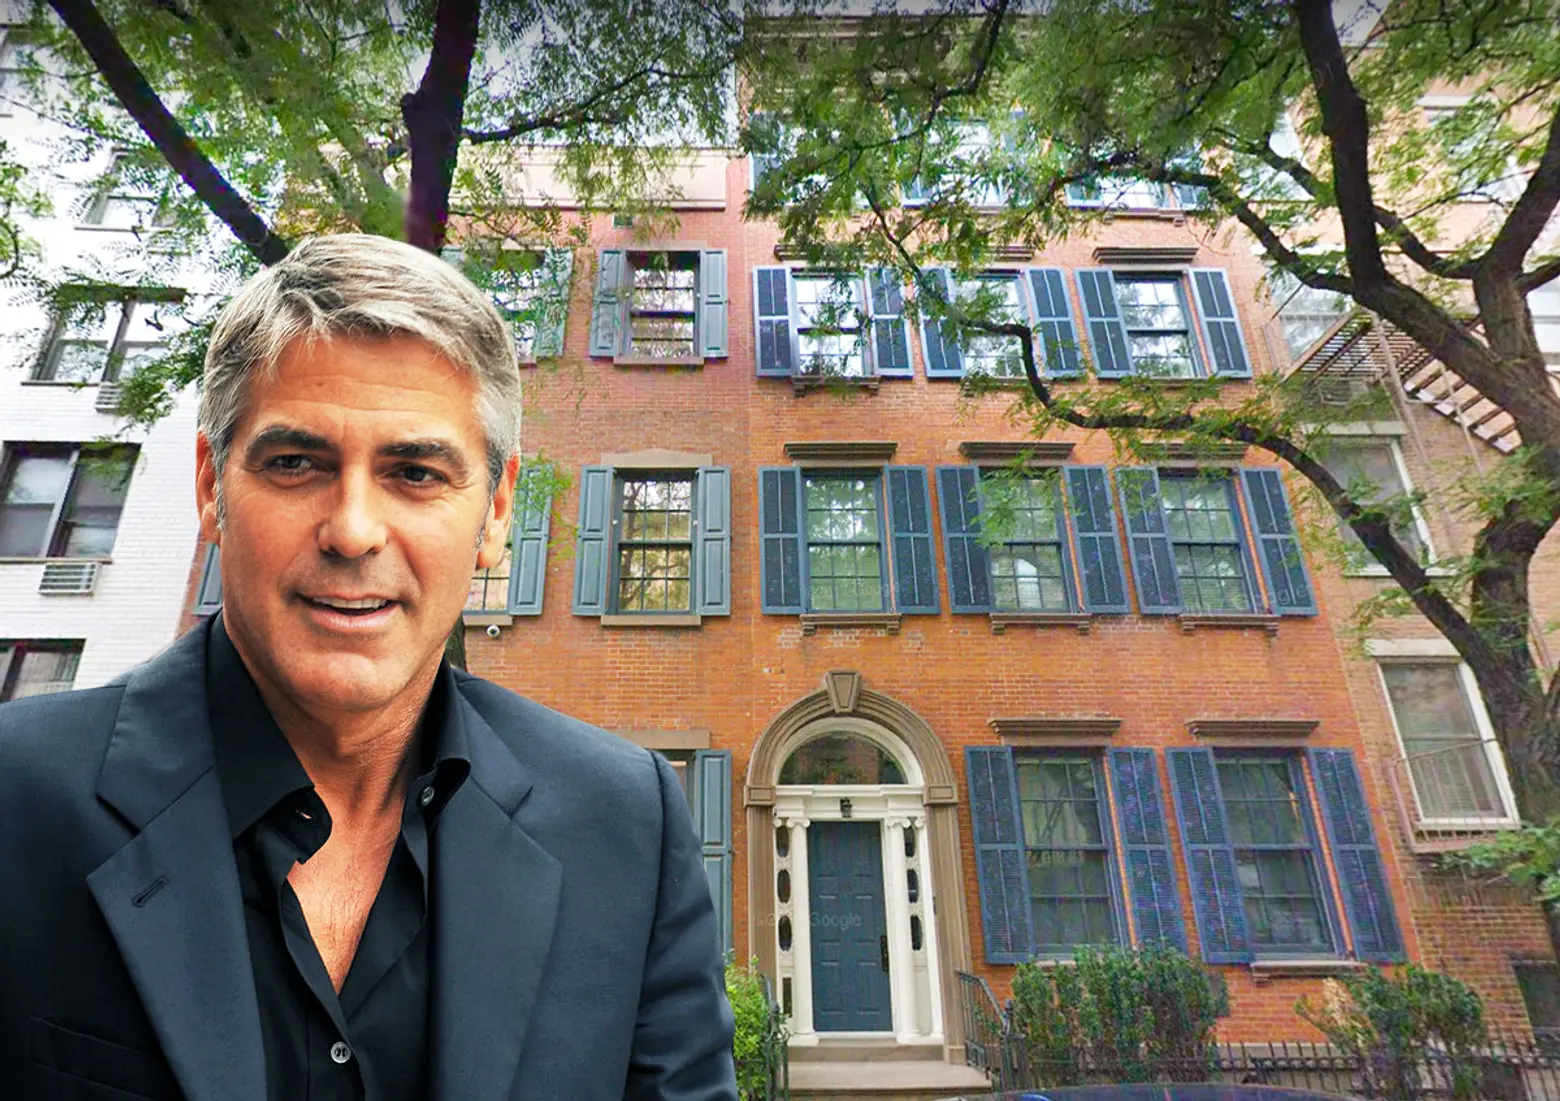 George and Amal Clooney’s Soho rental is operating as an illegal transient hotel